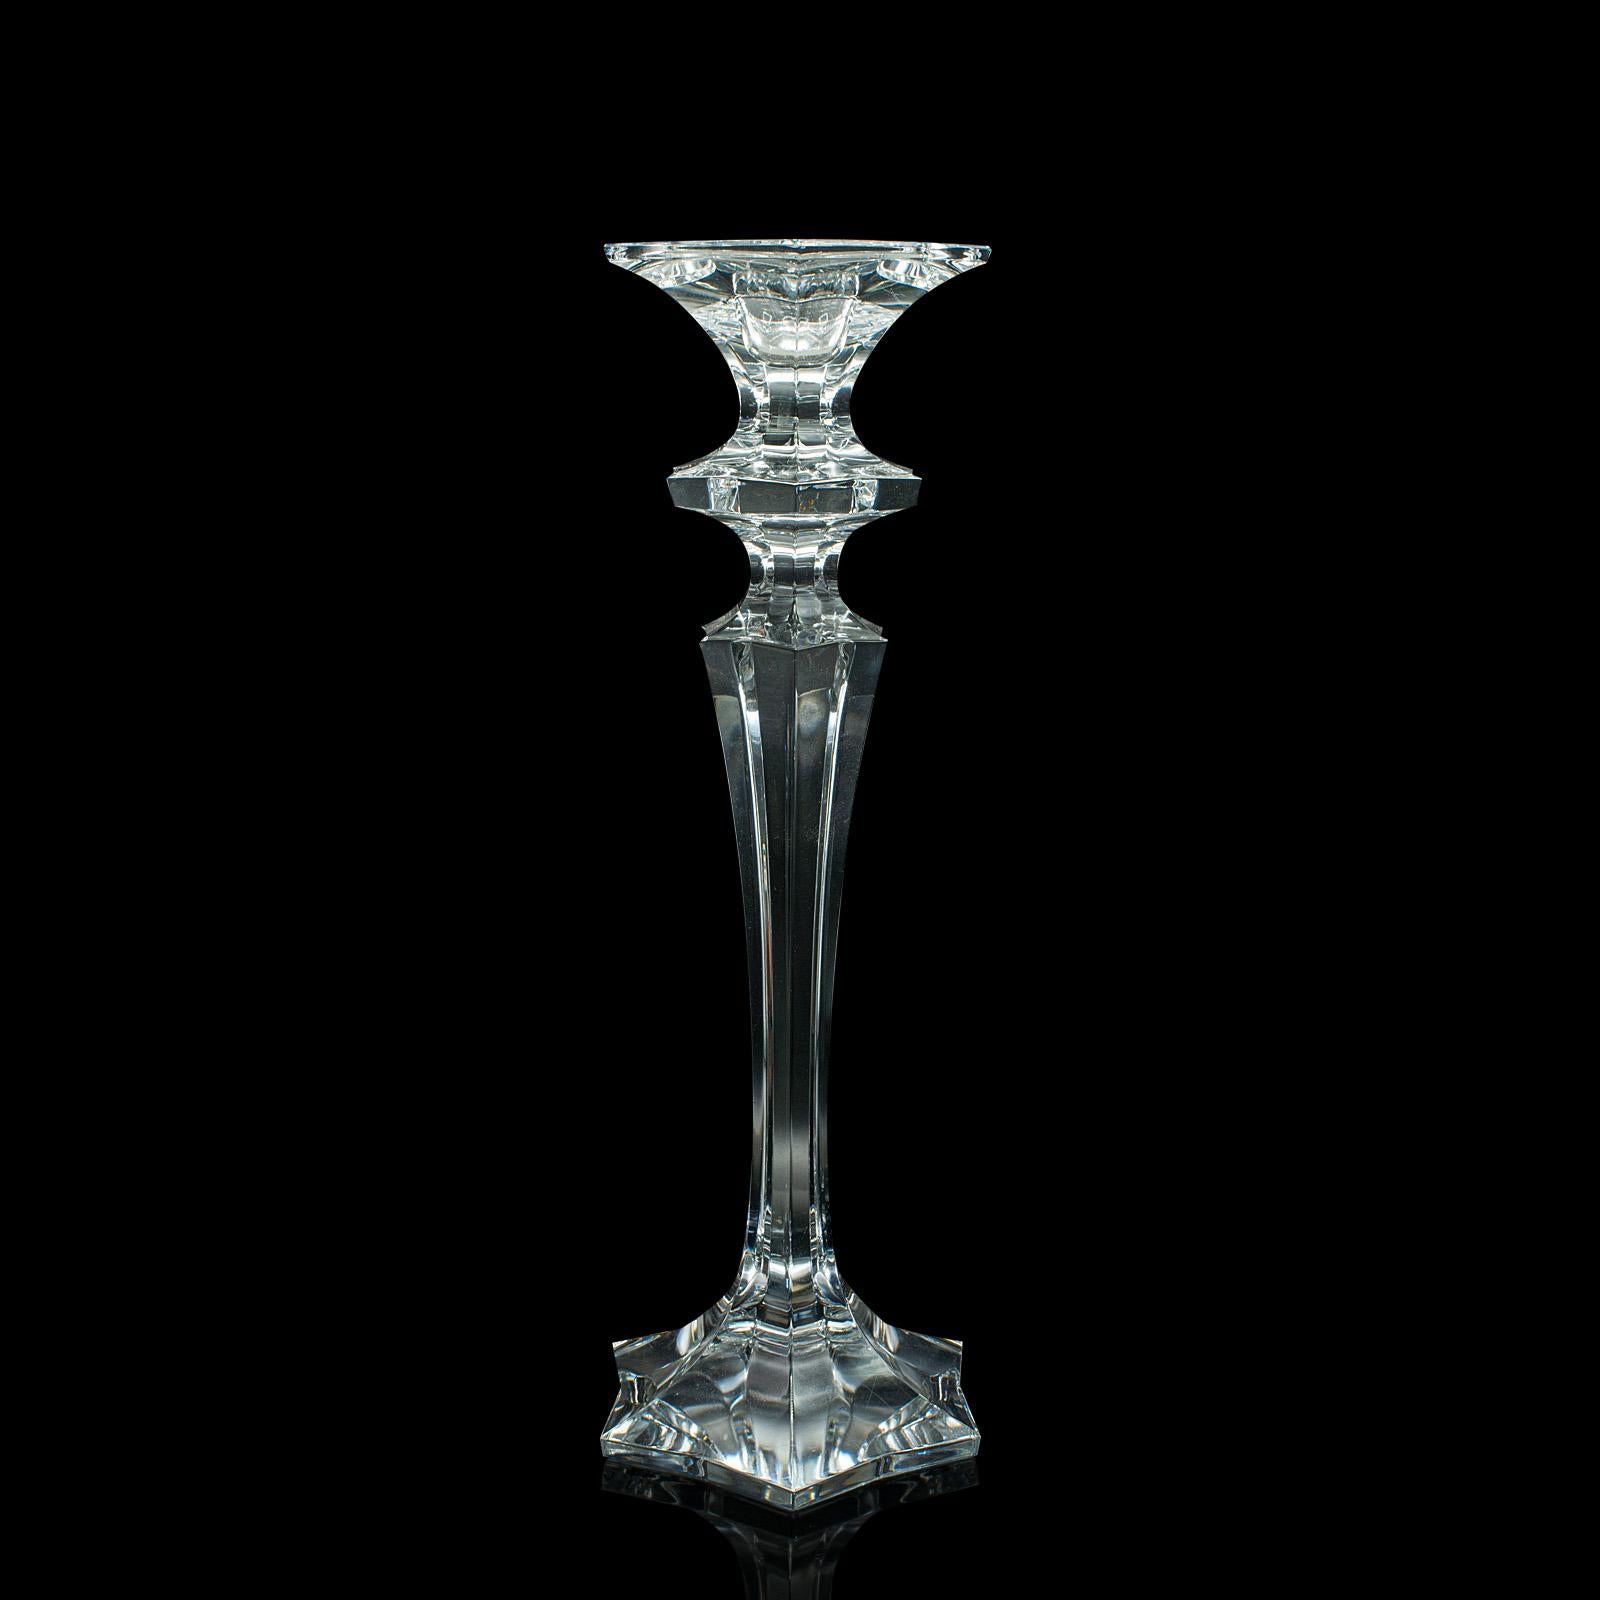 Pair Of Vintage Candlesticks, English, Glass, Decorative Candle Nozzle, C.1970 In Good Condition For Sale In Hele, Devon, GB